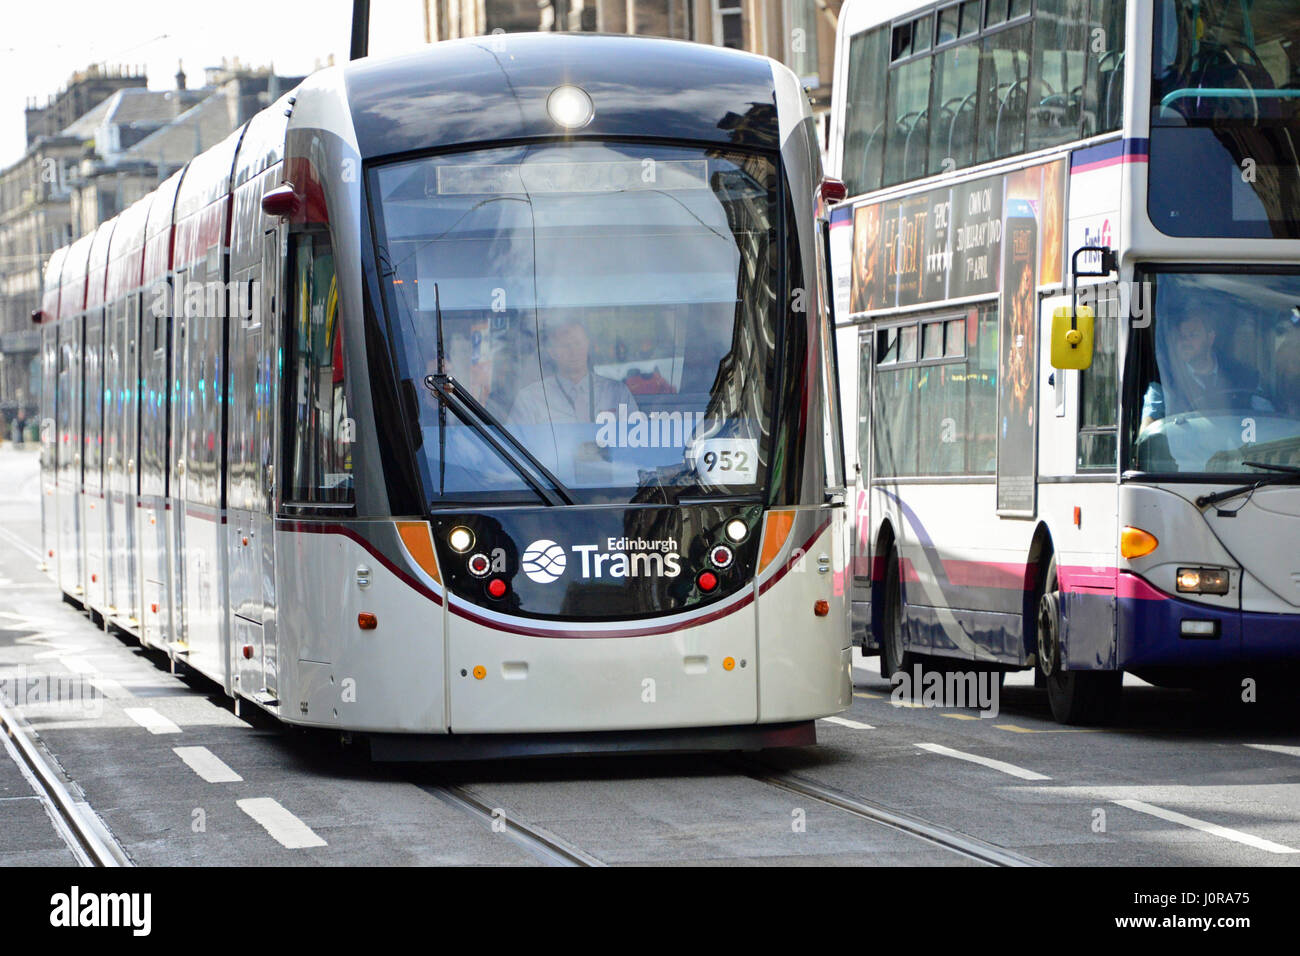 A tram makes its way through Edinburgh city centre in the final stages of testing for the capital's new tramway system Stock Photo